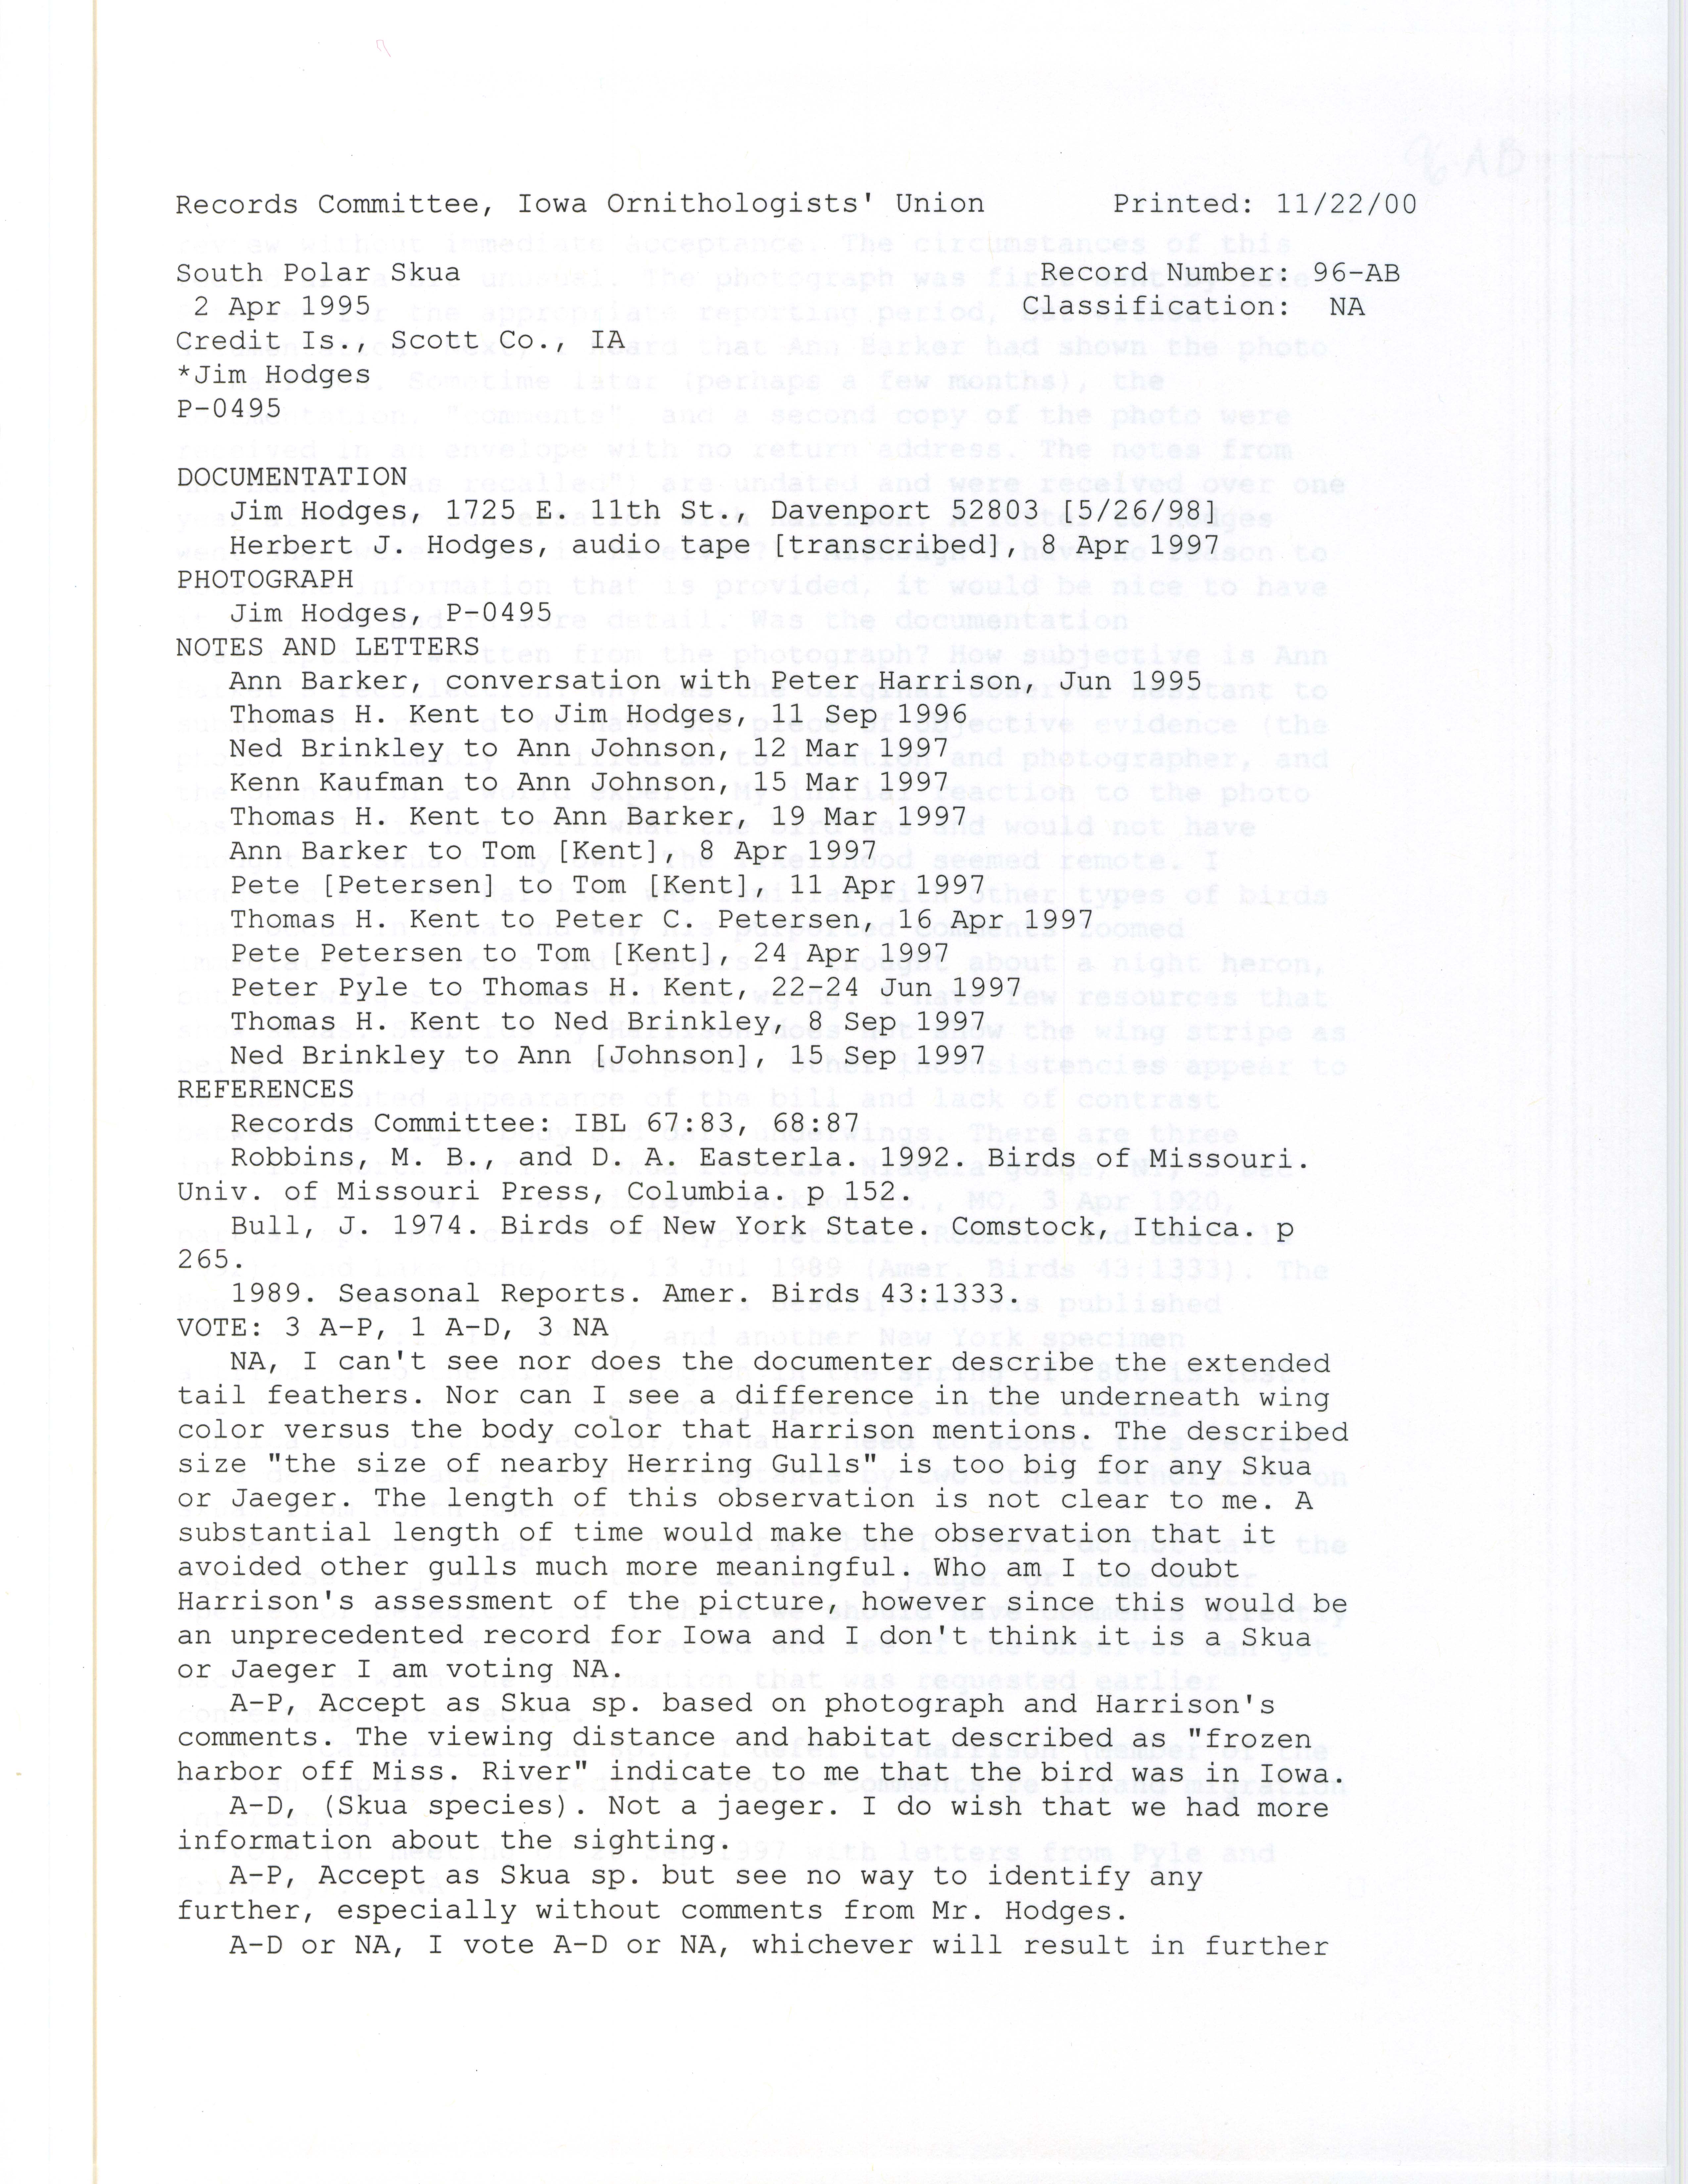 Records Committee review for rare bird sighting of South Polar Skua at Credit Island, 1995